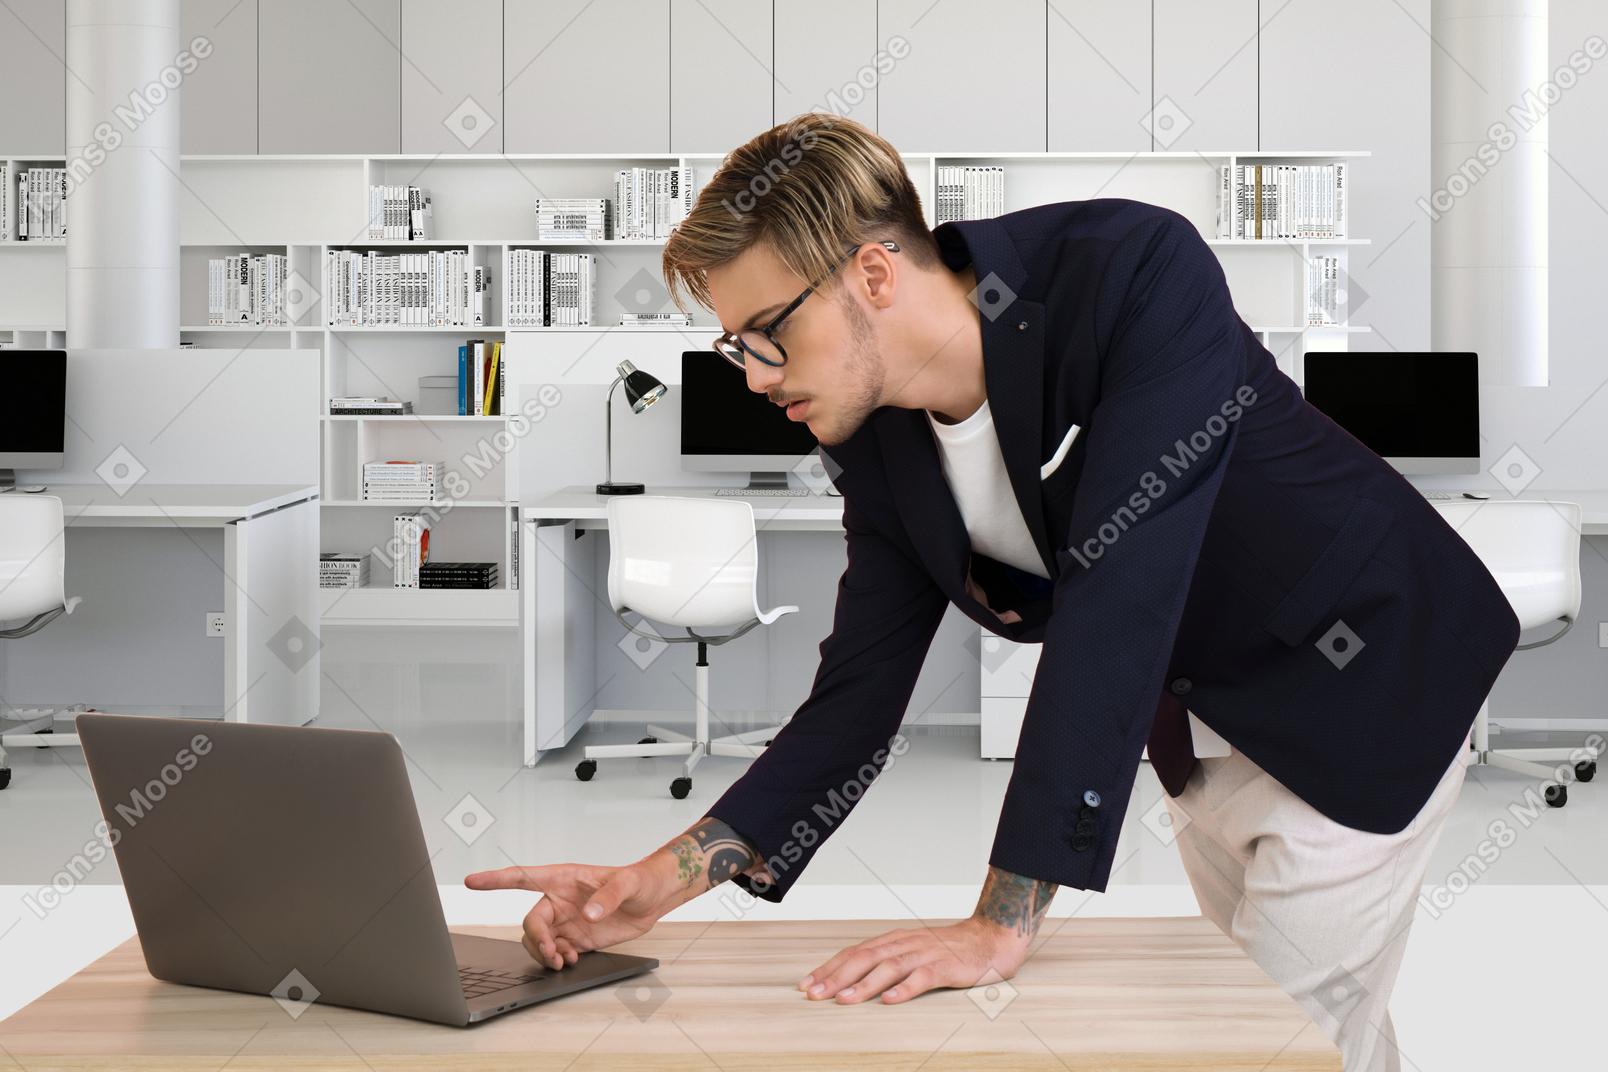 Man working on a laptop